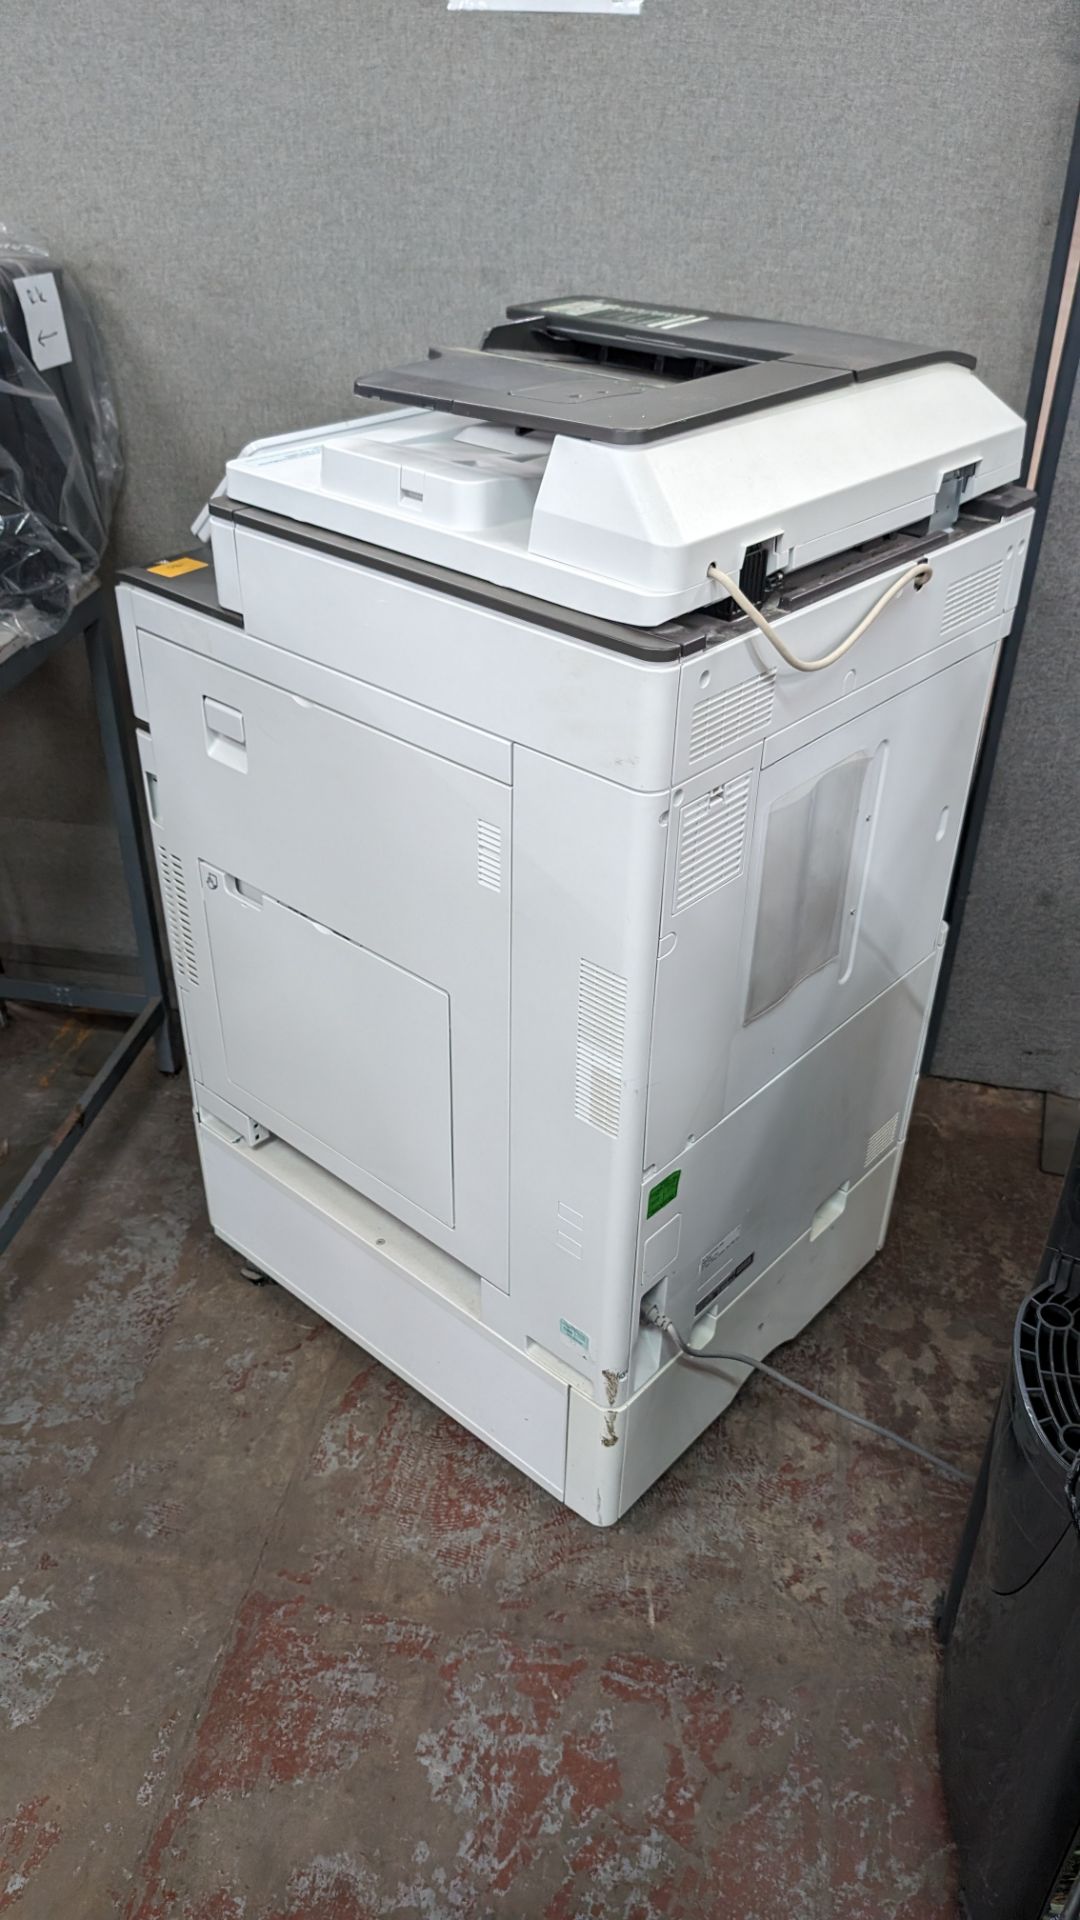 Ricoh MP C3003 floor standing copier with touchscreen controls, ADF, twin paper cassettes & more - Image 16 of 18